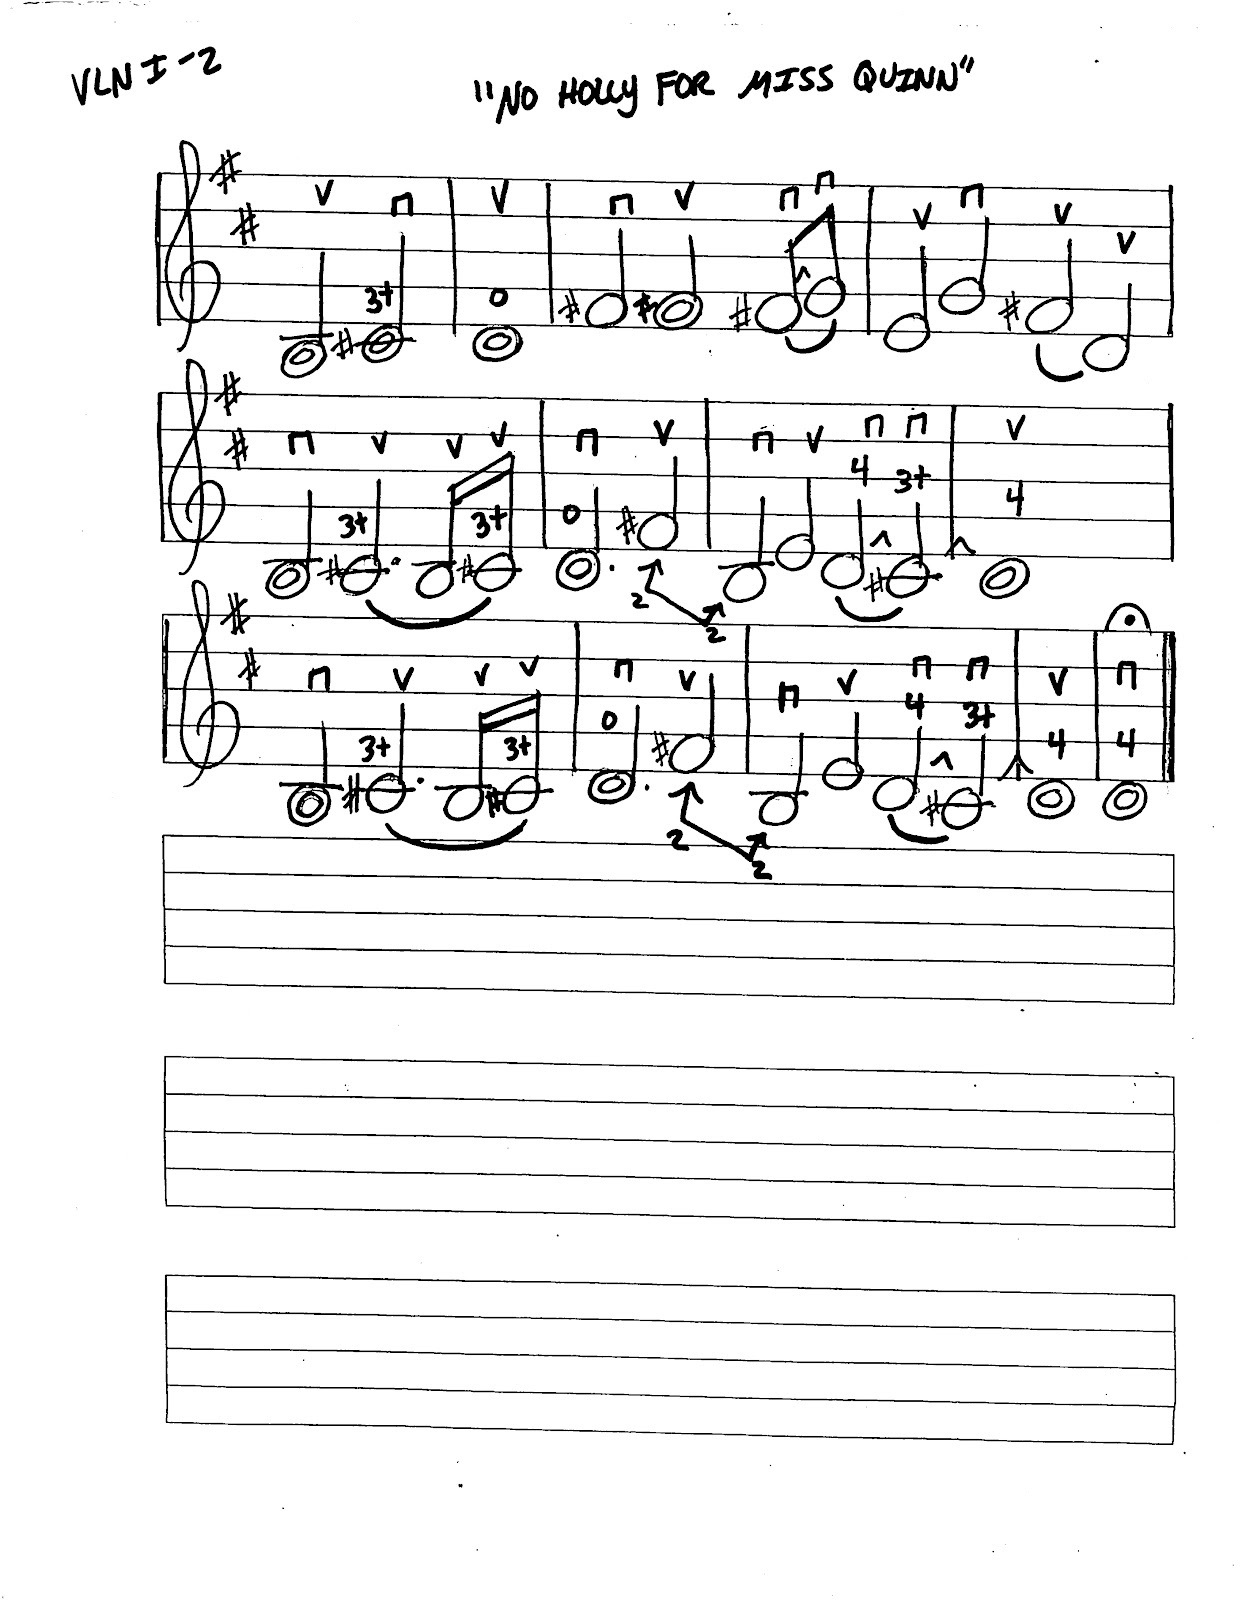 Miss Jacobson's Music: NO HOLLY FOR MISS QUINN MUSIC WORKSHEETS